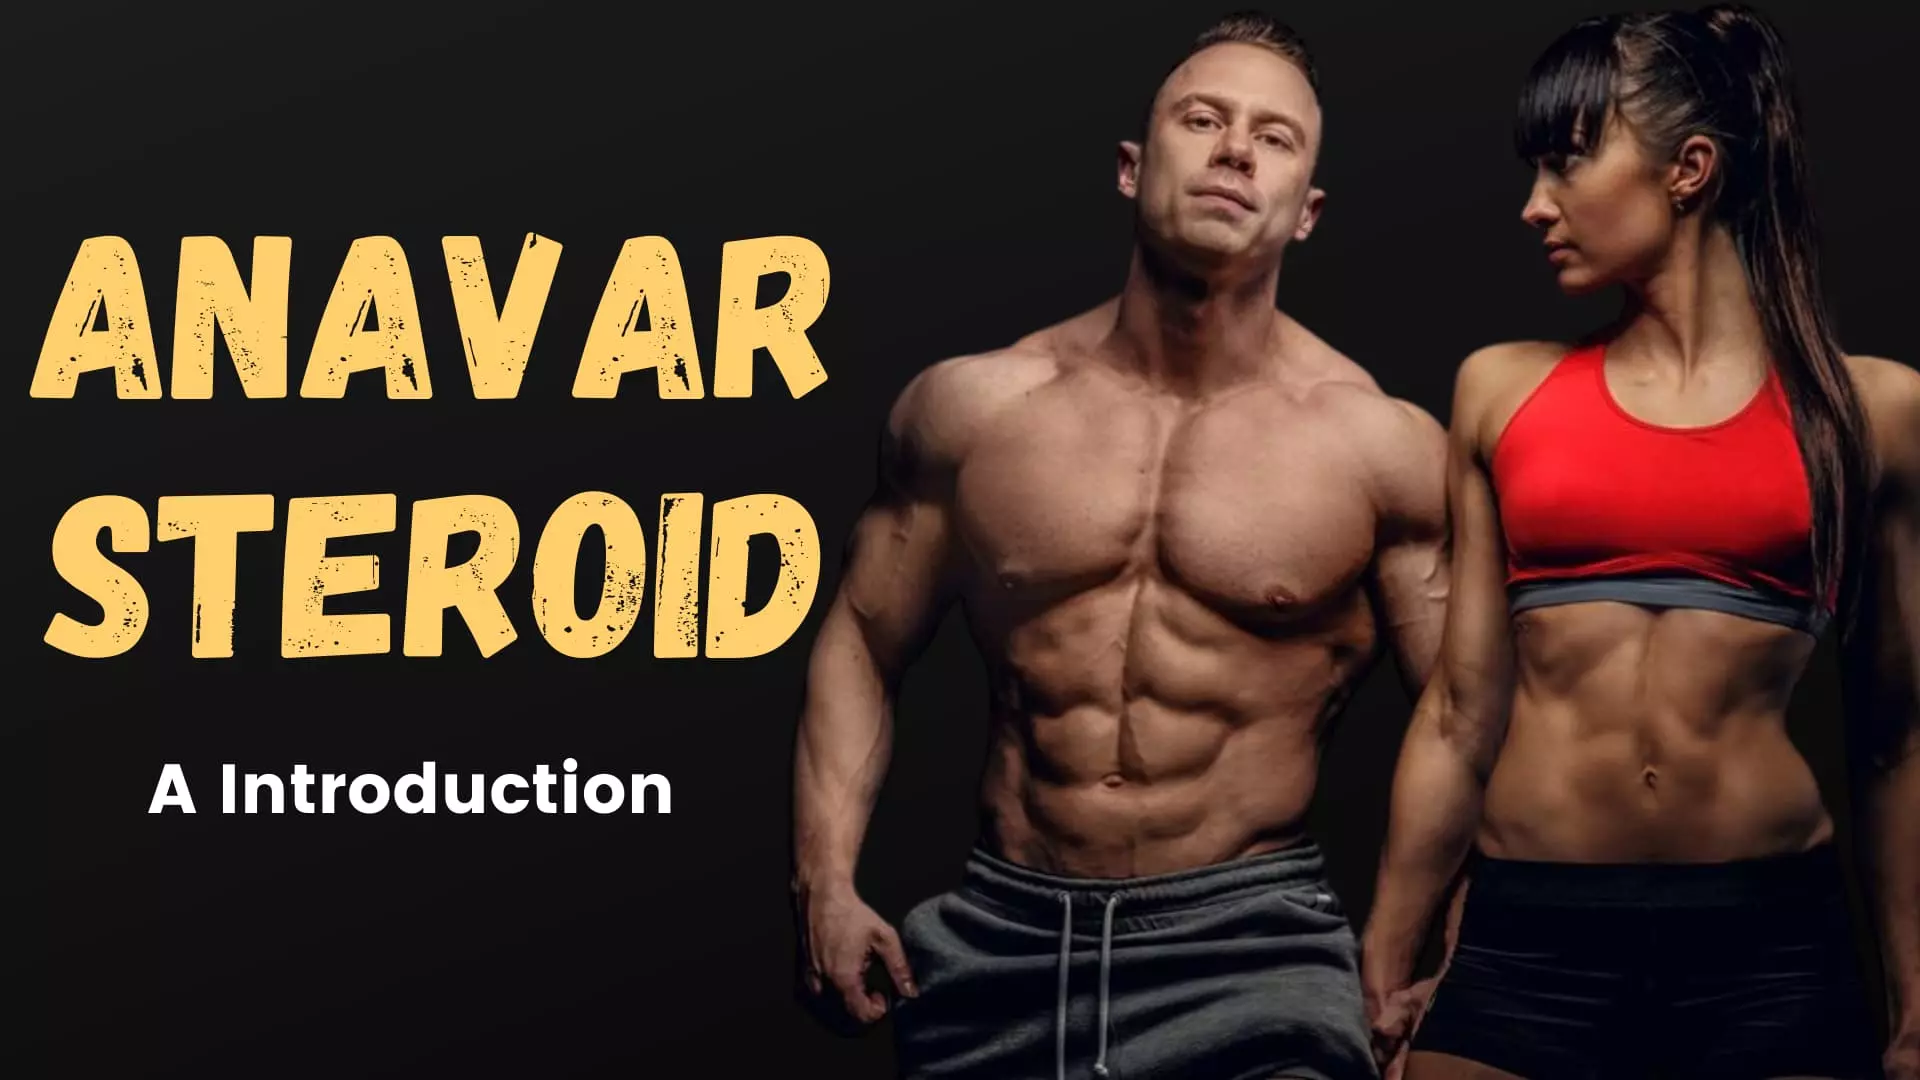 Anavar Steroid – A Introduction